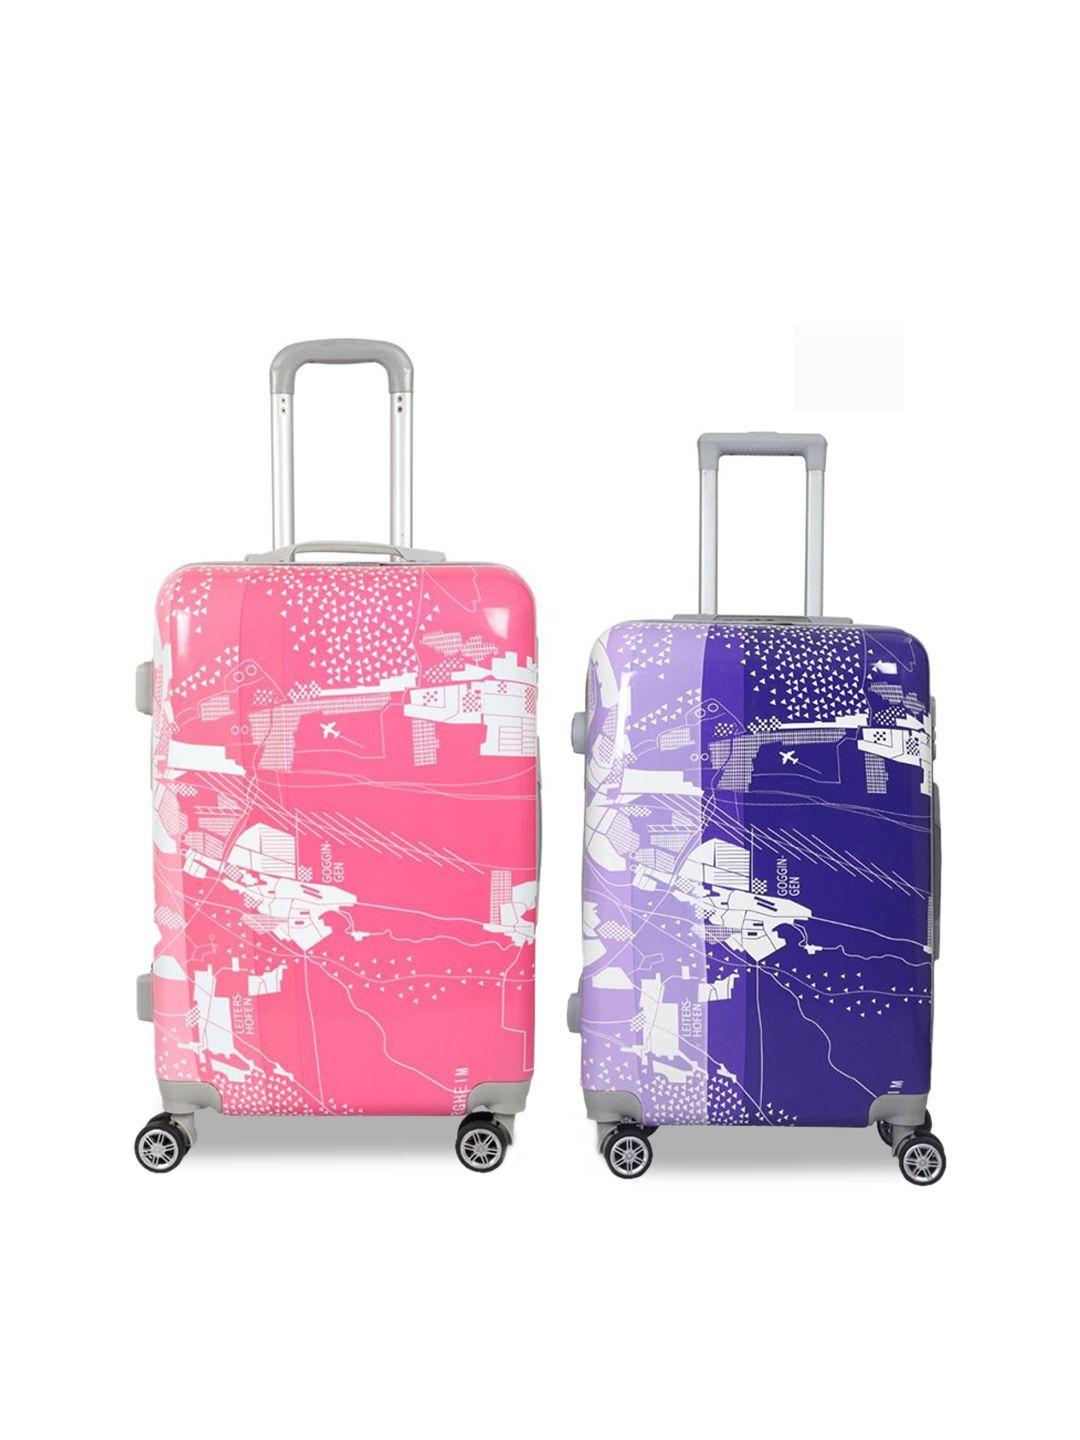 polo class set of 2 printed hard sided trolley suitcase